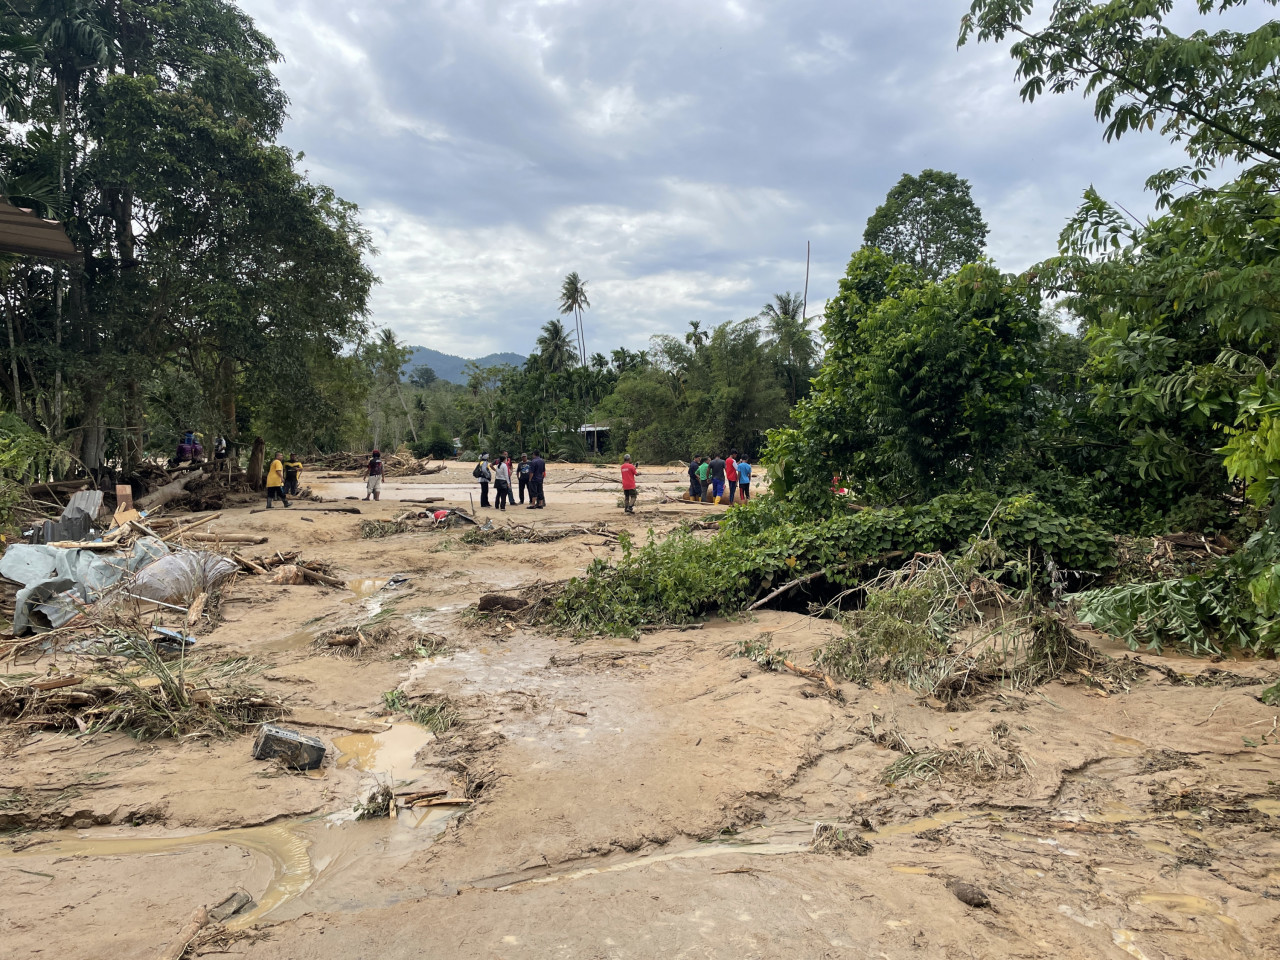 Sahabat Alam Malaysia president Meenaskhi Raman slams the country’s low level of preparedness to deal with the severe effects of climate change. – SOFIA NASIR/The Vibes pic, July 5, 2022